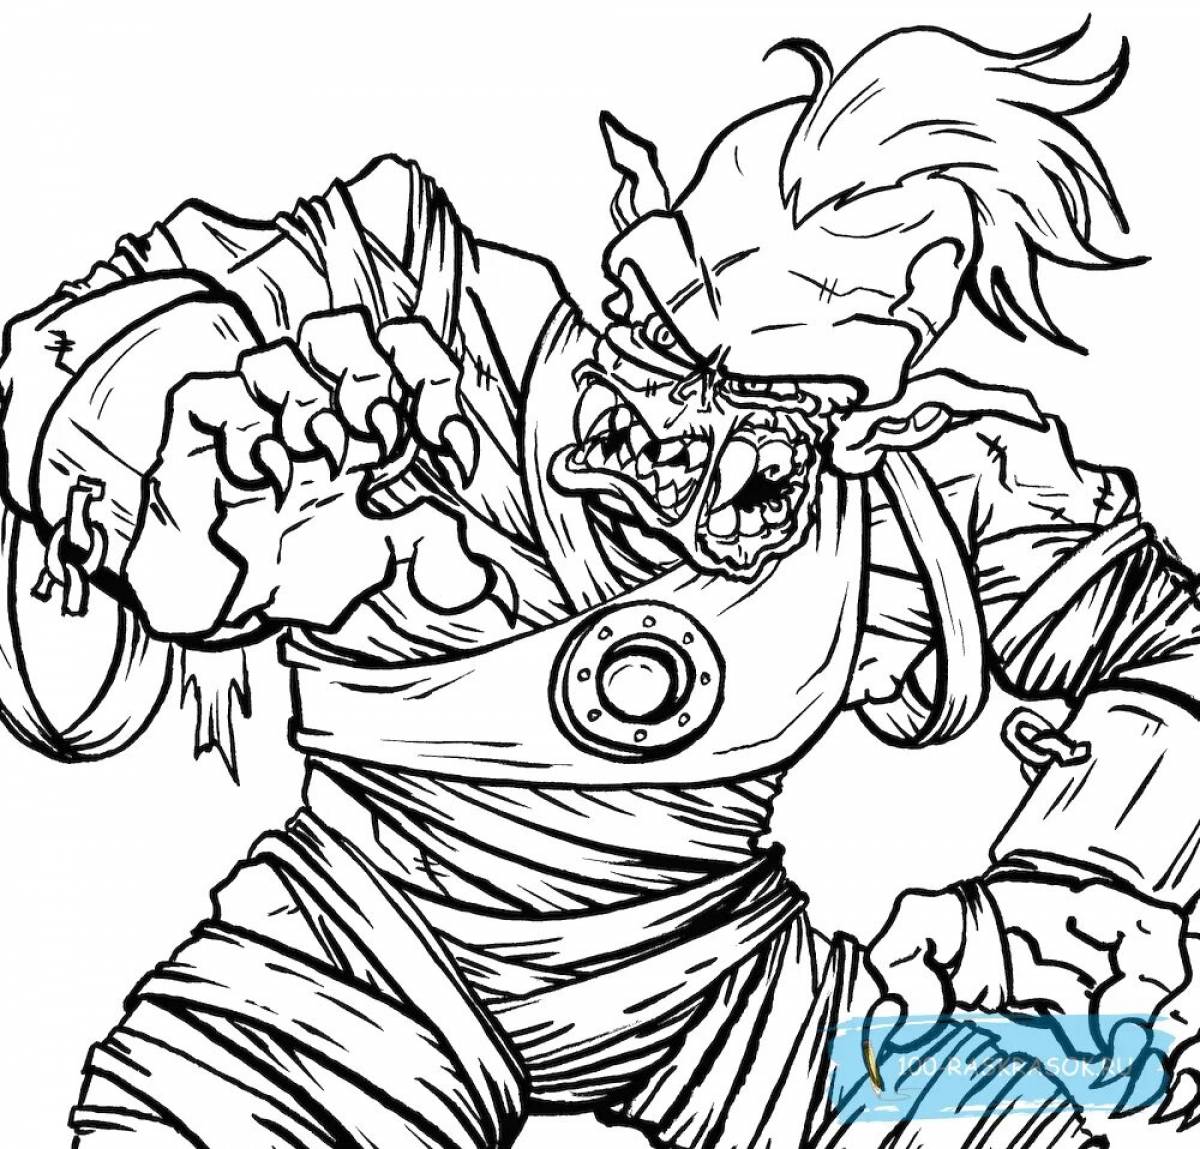 Clever gujitsu heroes coloring book for kids